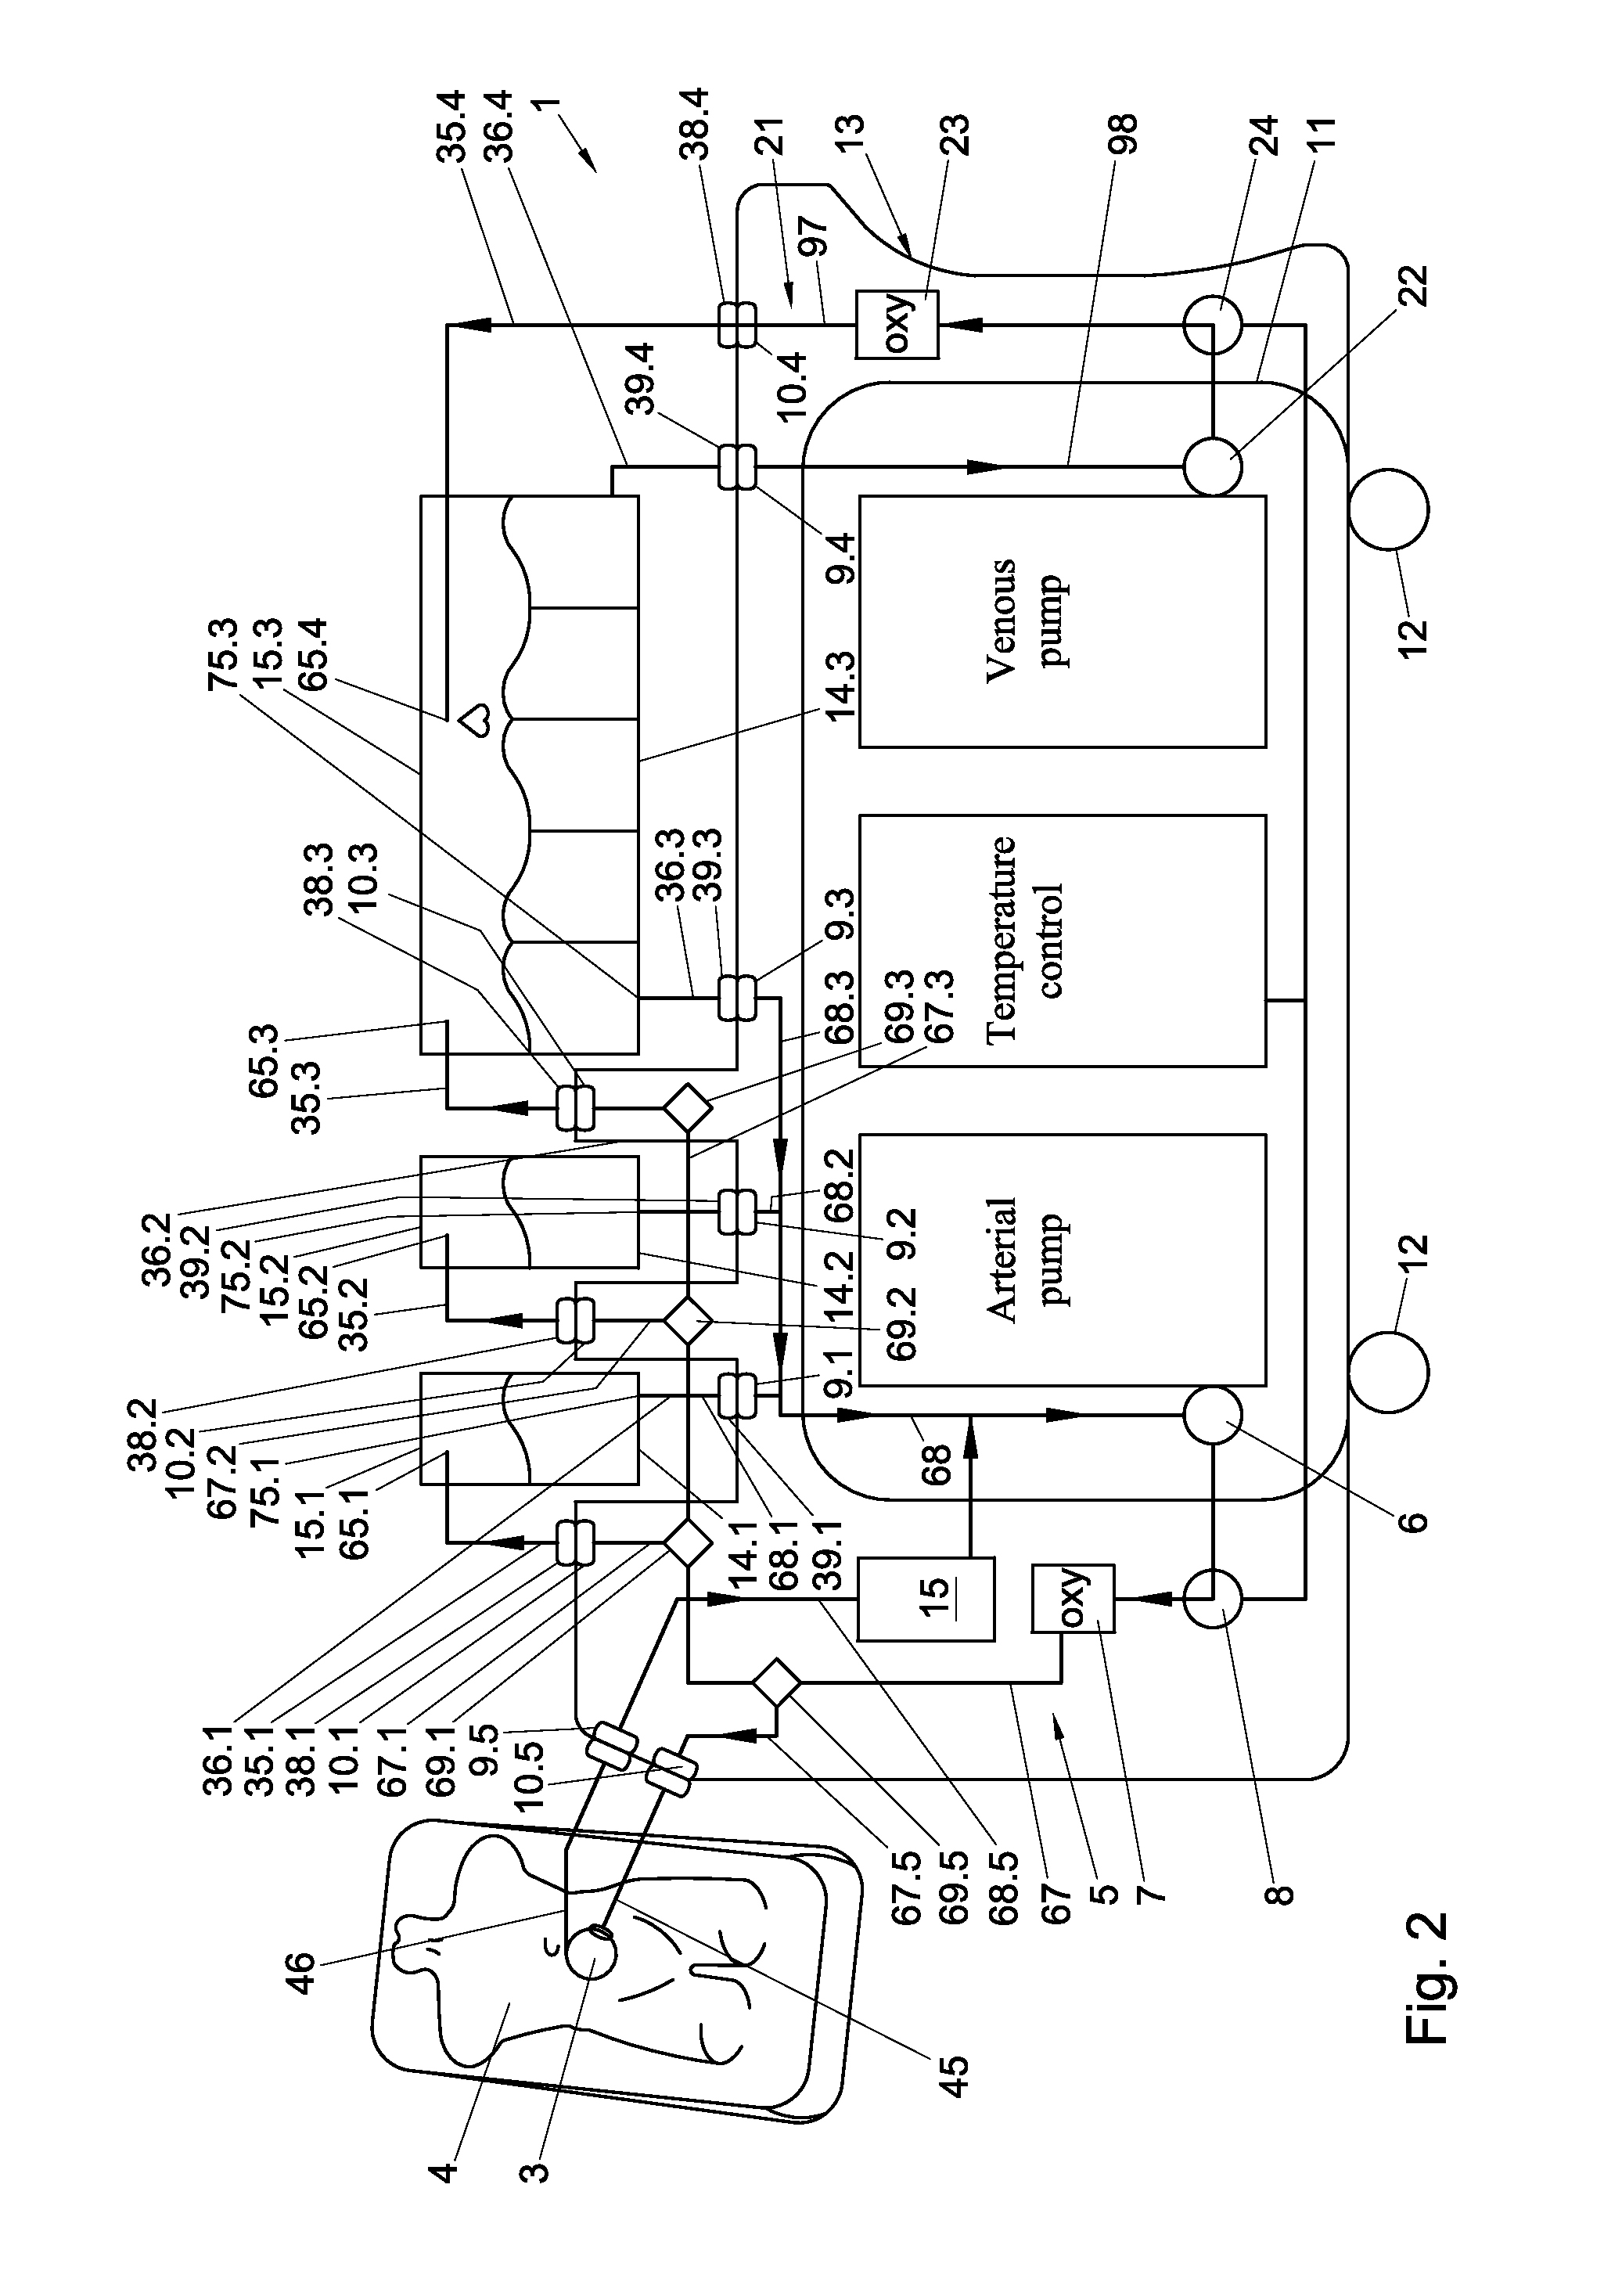 Apparatus, system and method for conditioning and preserving an organ from a donor